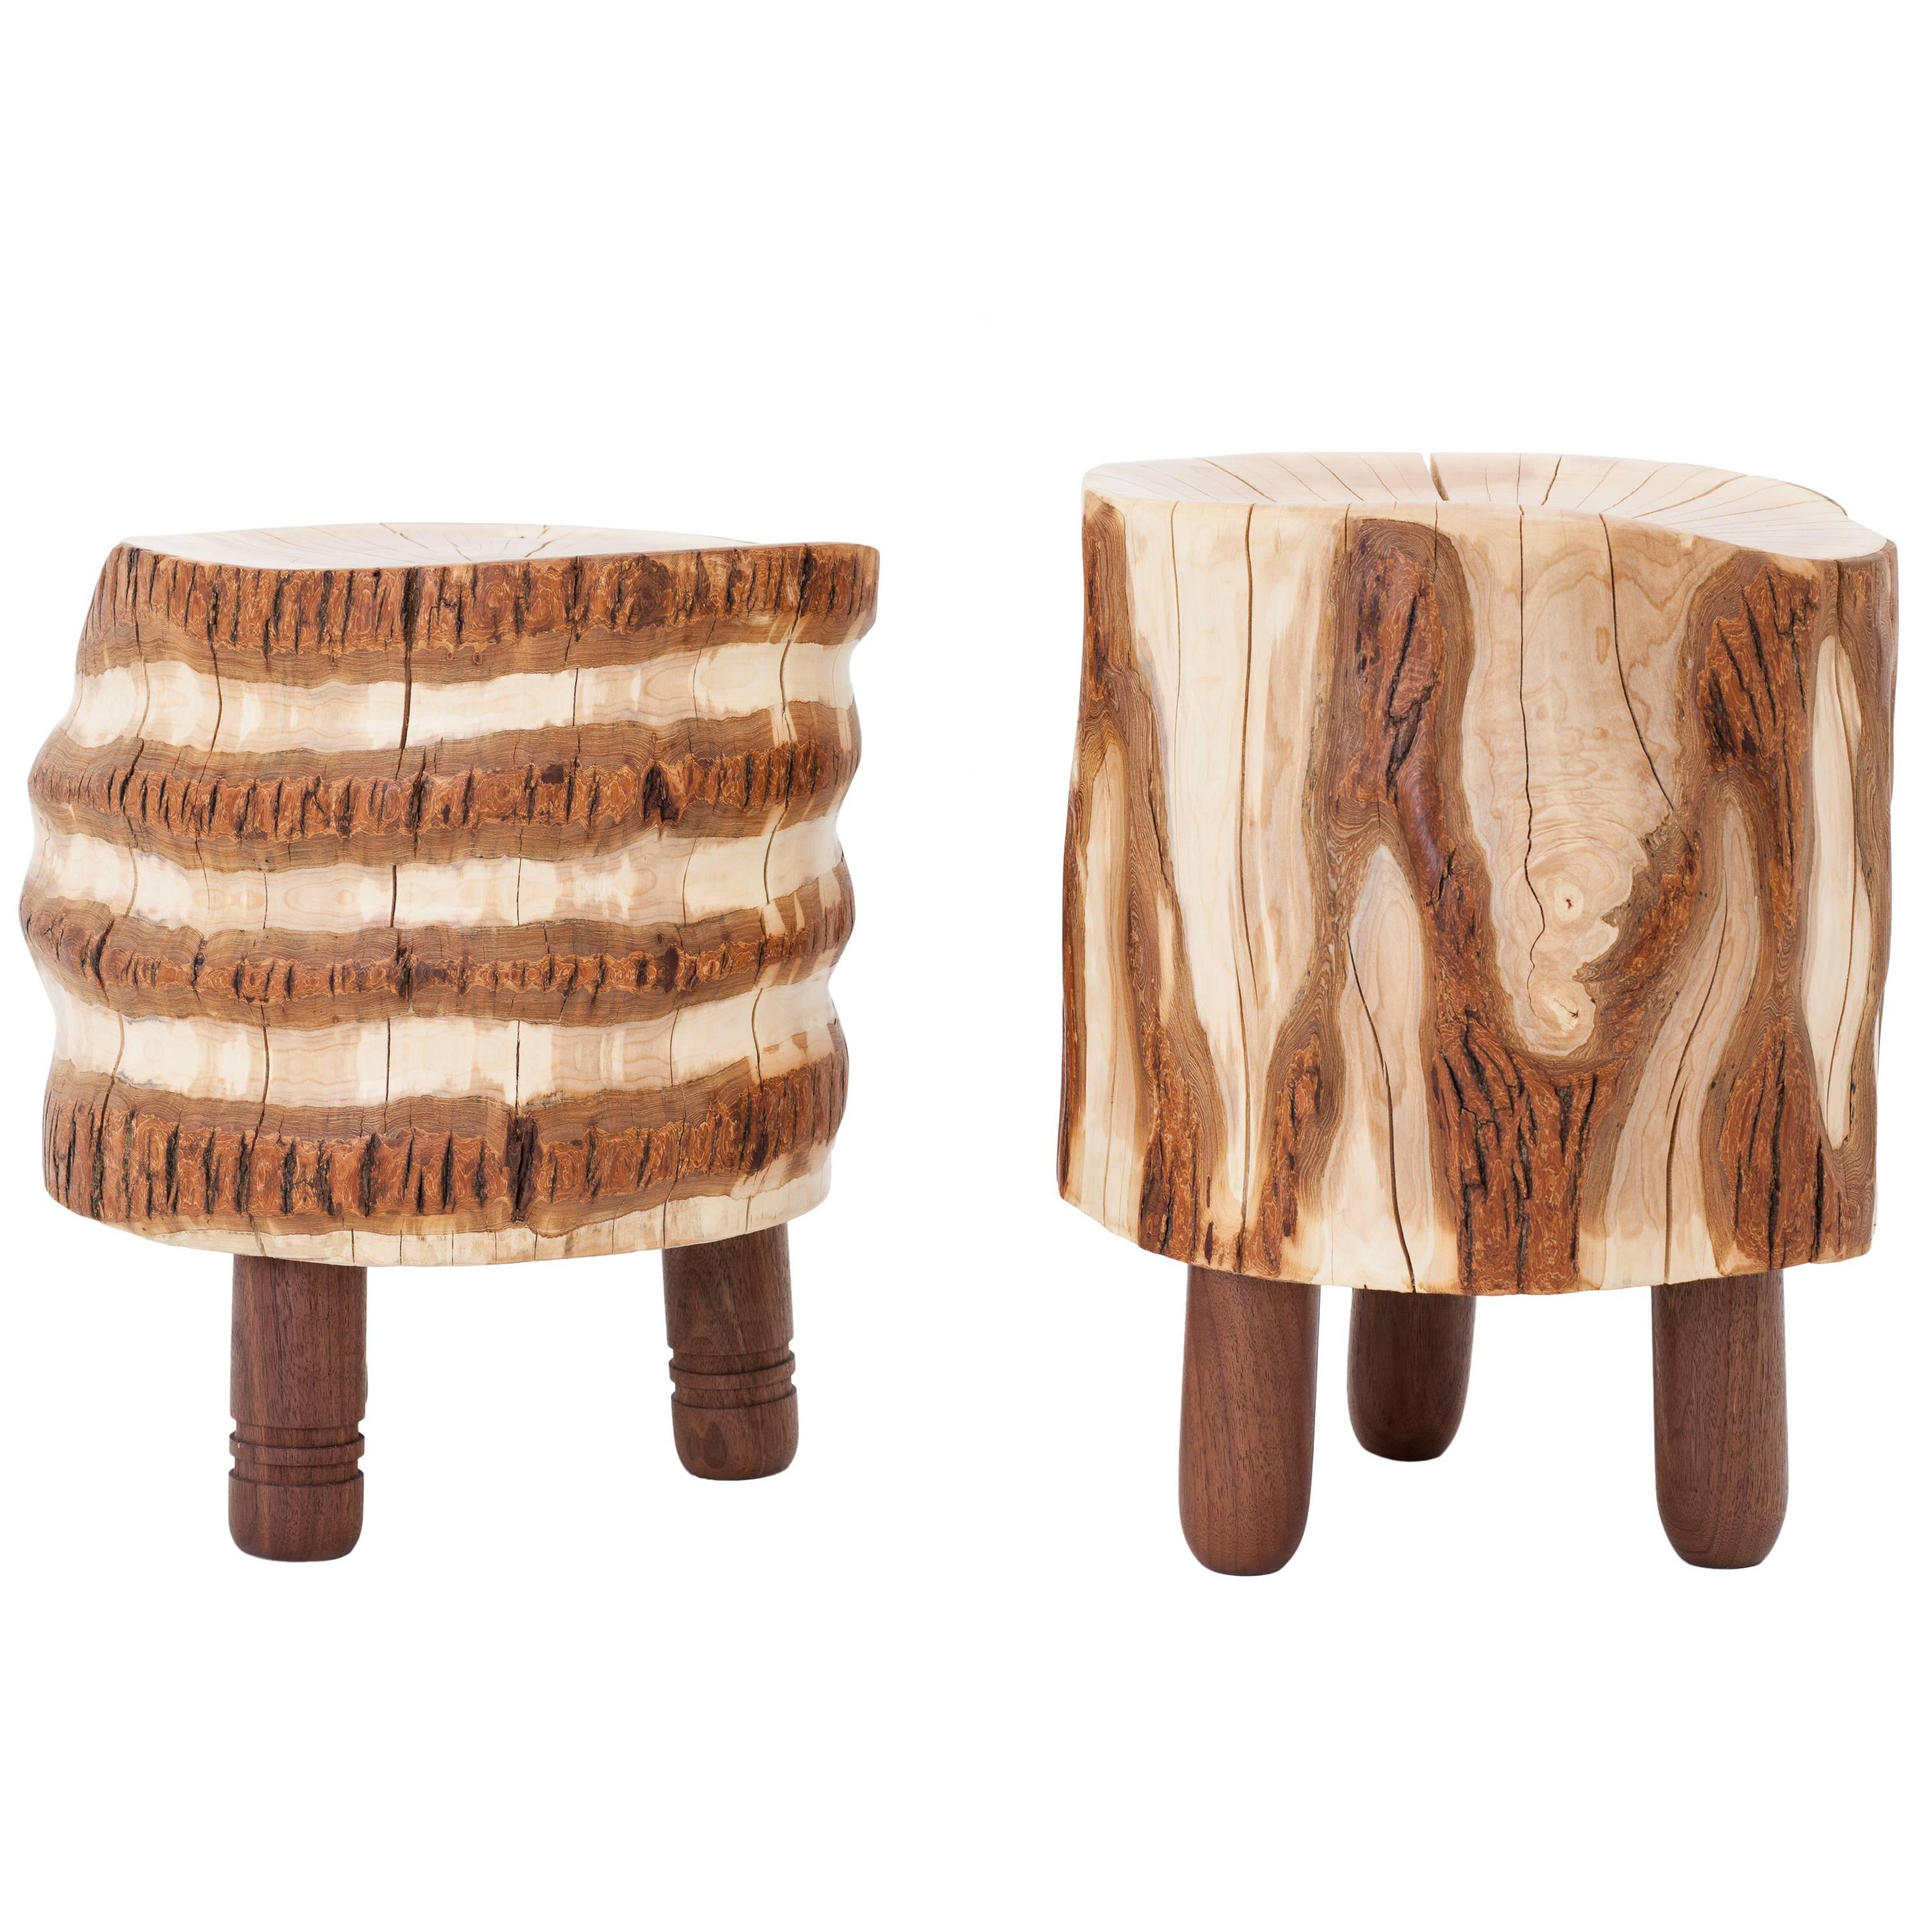 Reclaimed Salvaged Hurricane Sandy Stump Stools with Hand-Turned Legs & Drawers